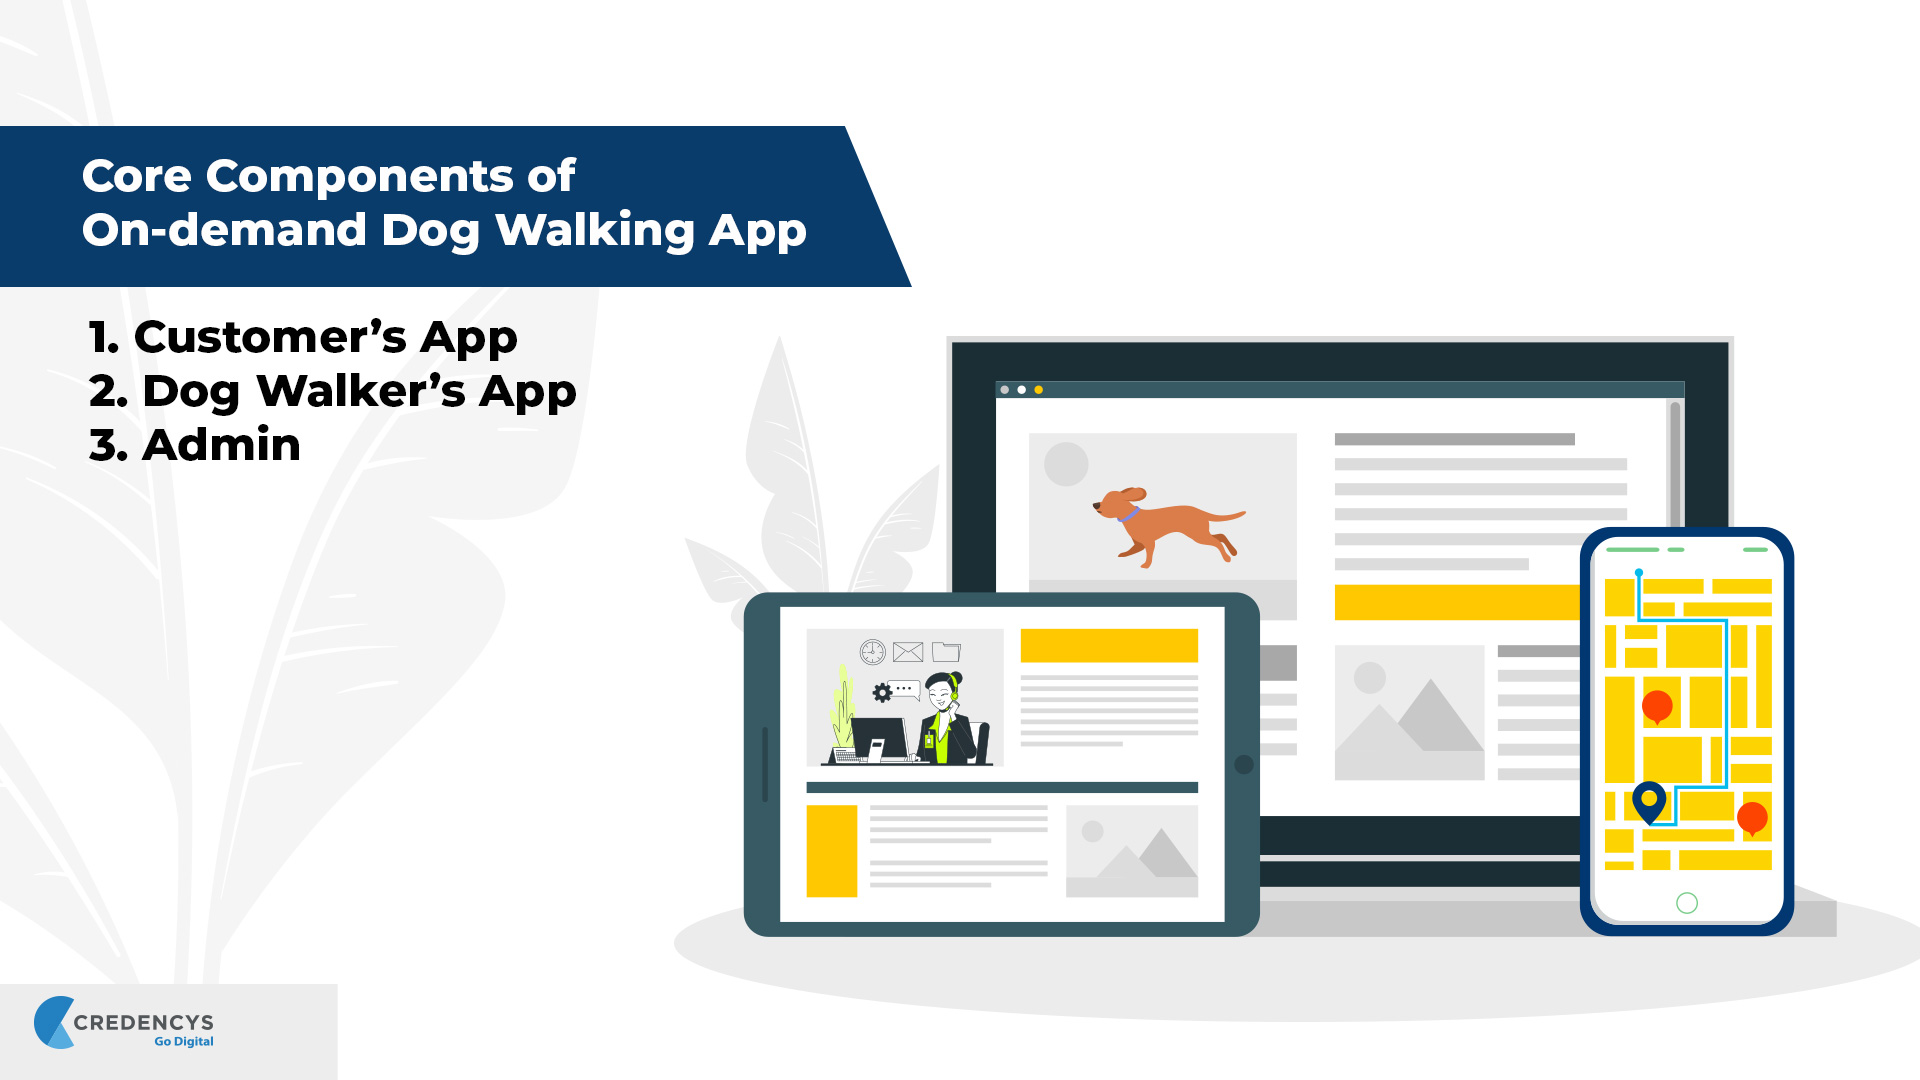 Core Components of On-demand Dog Walking App